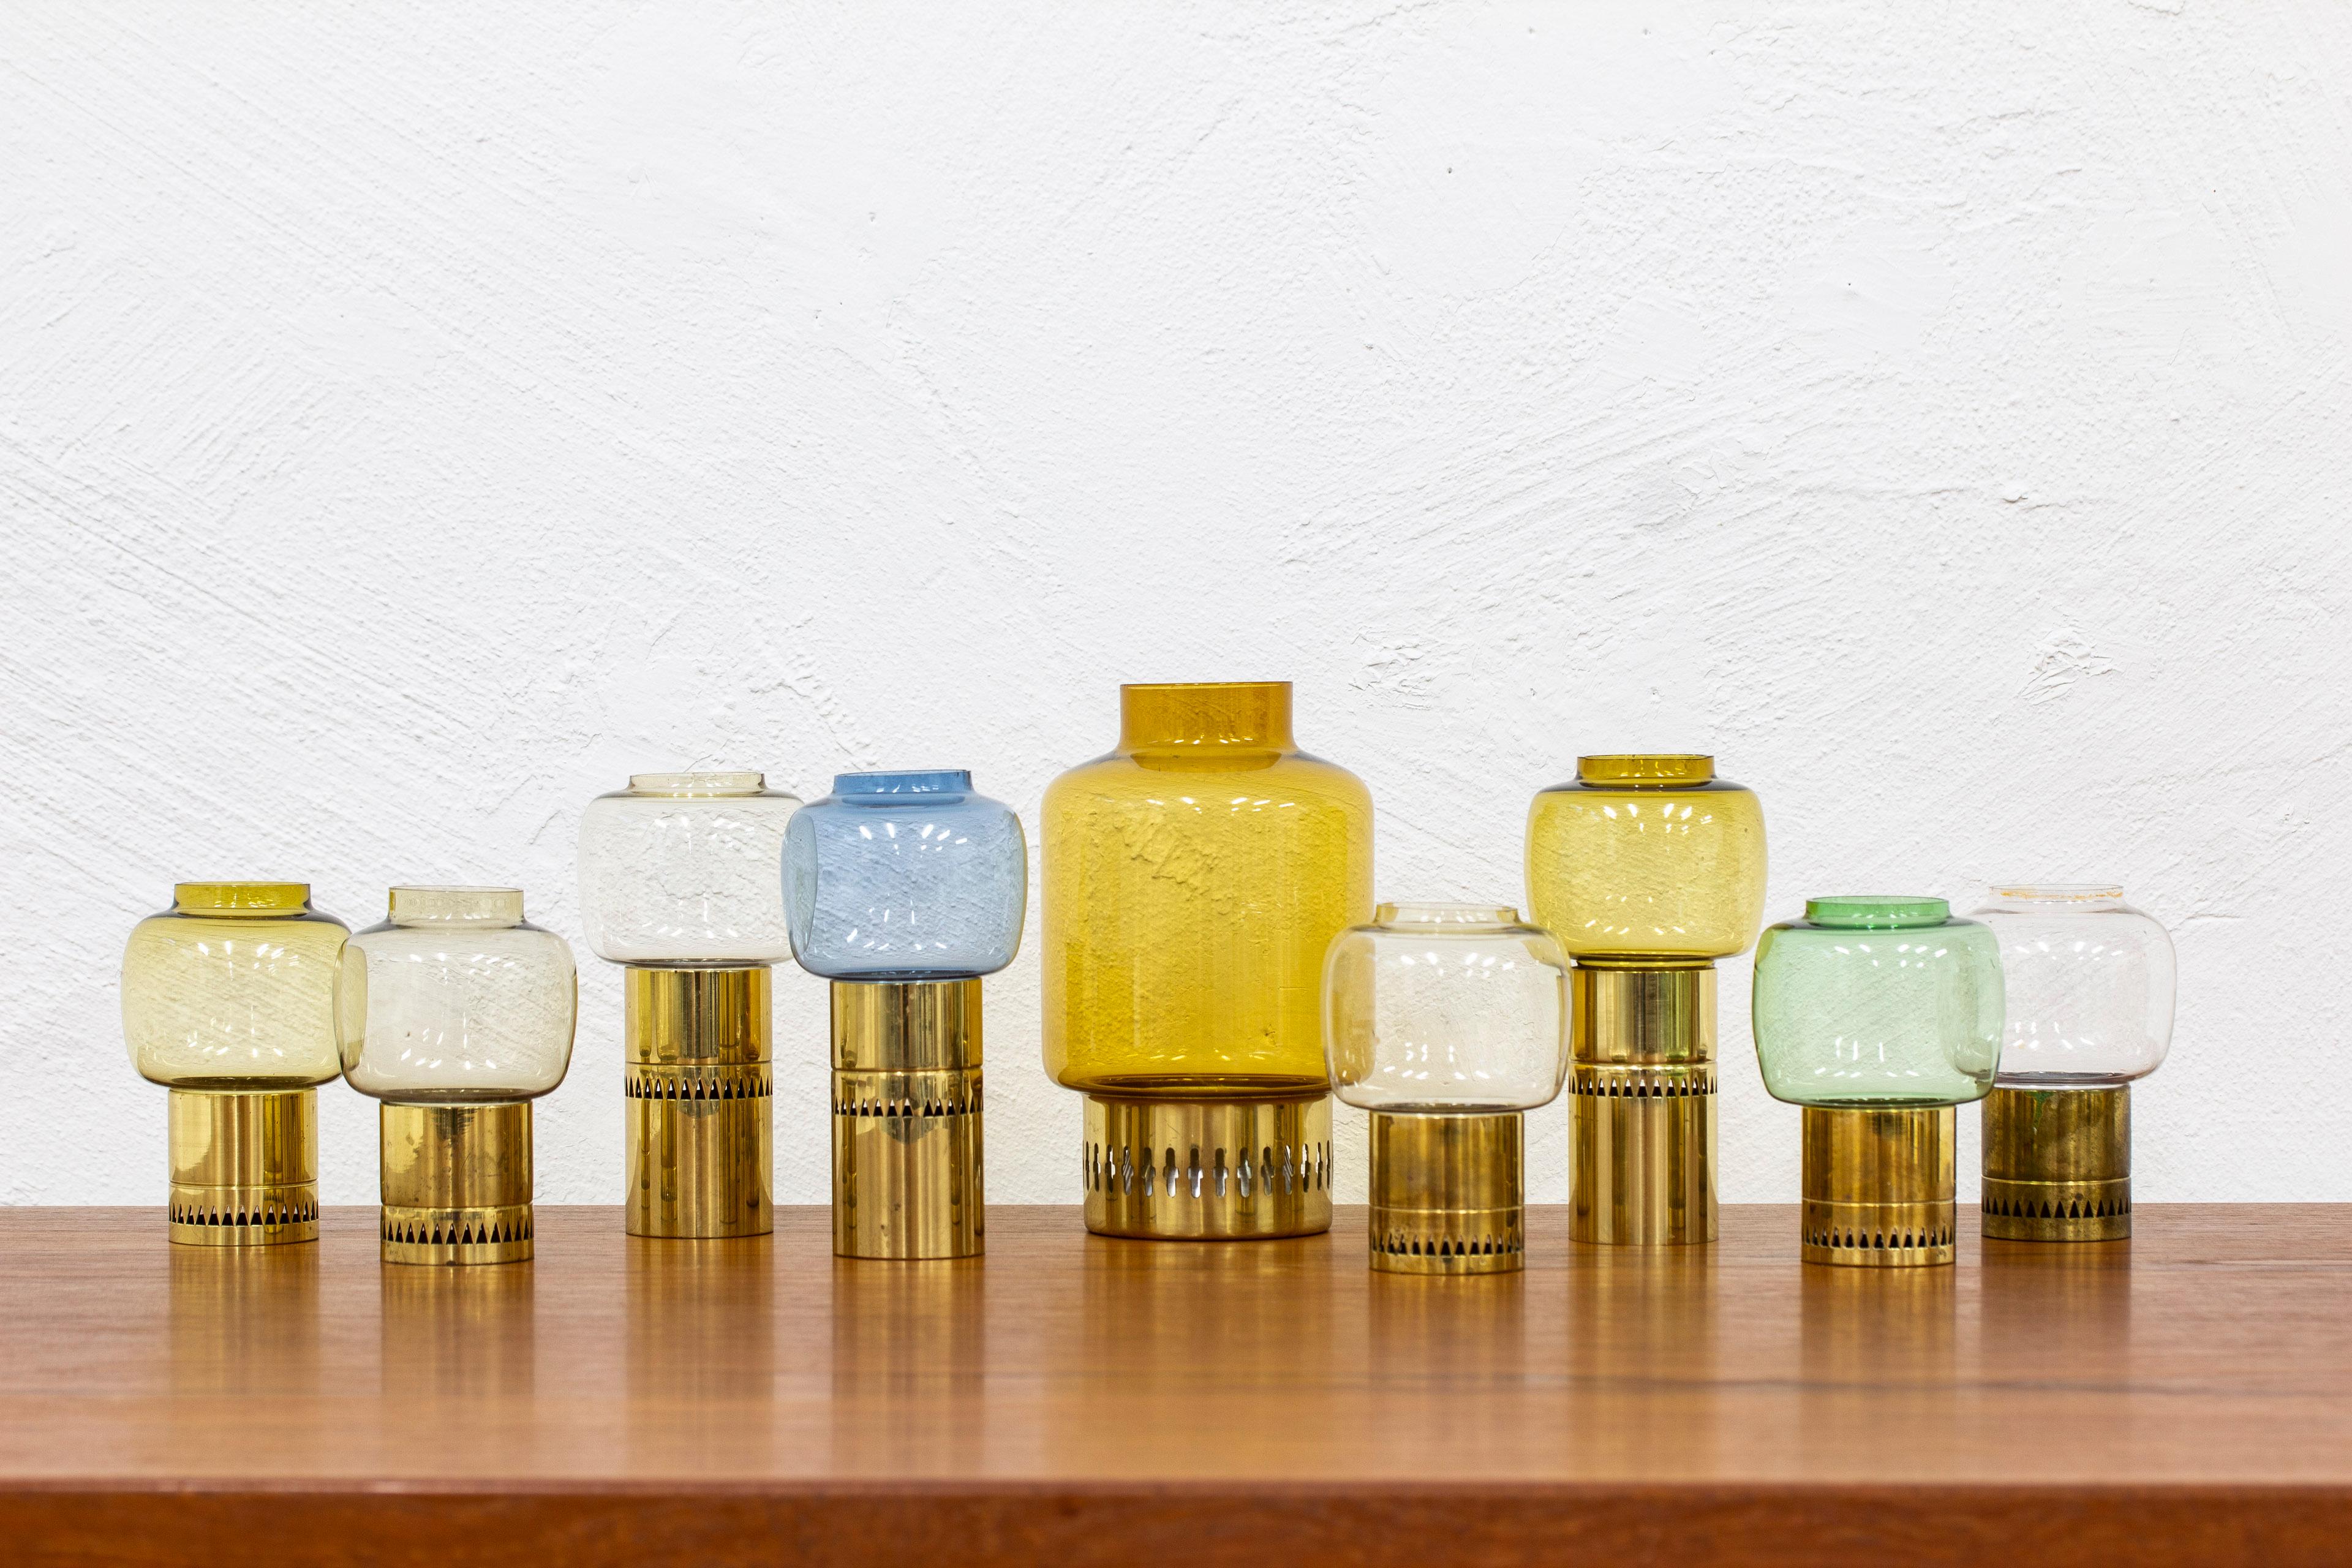 Candle holders designed by Hans-Agne Jakobsson. Produced by his own company during the 1960s. Made from solid brass with multicolored glass shades. Good vintage condition with some age related wear and patina. Blue glass with tiny chips to the top